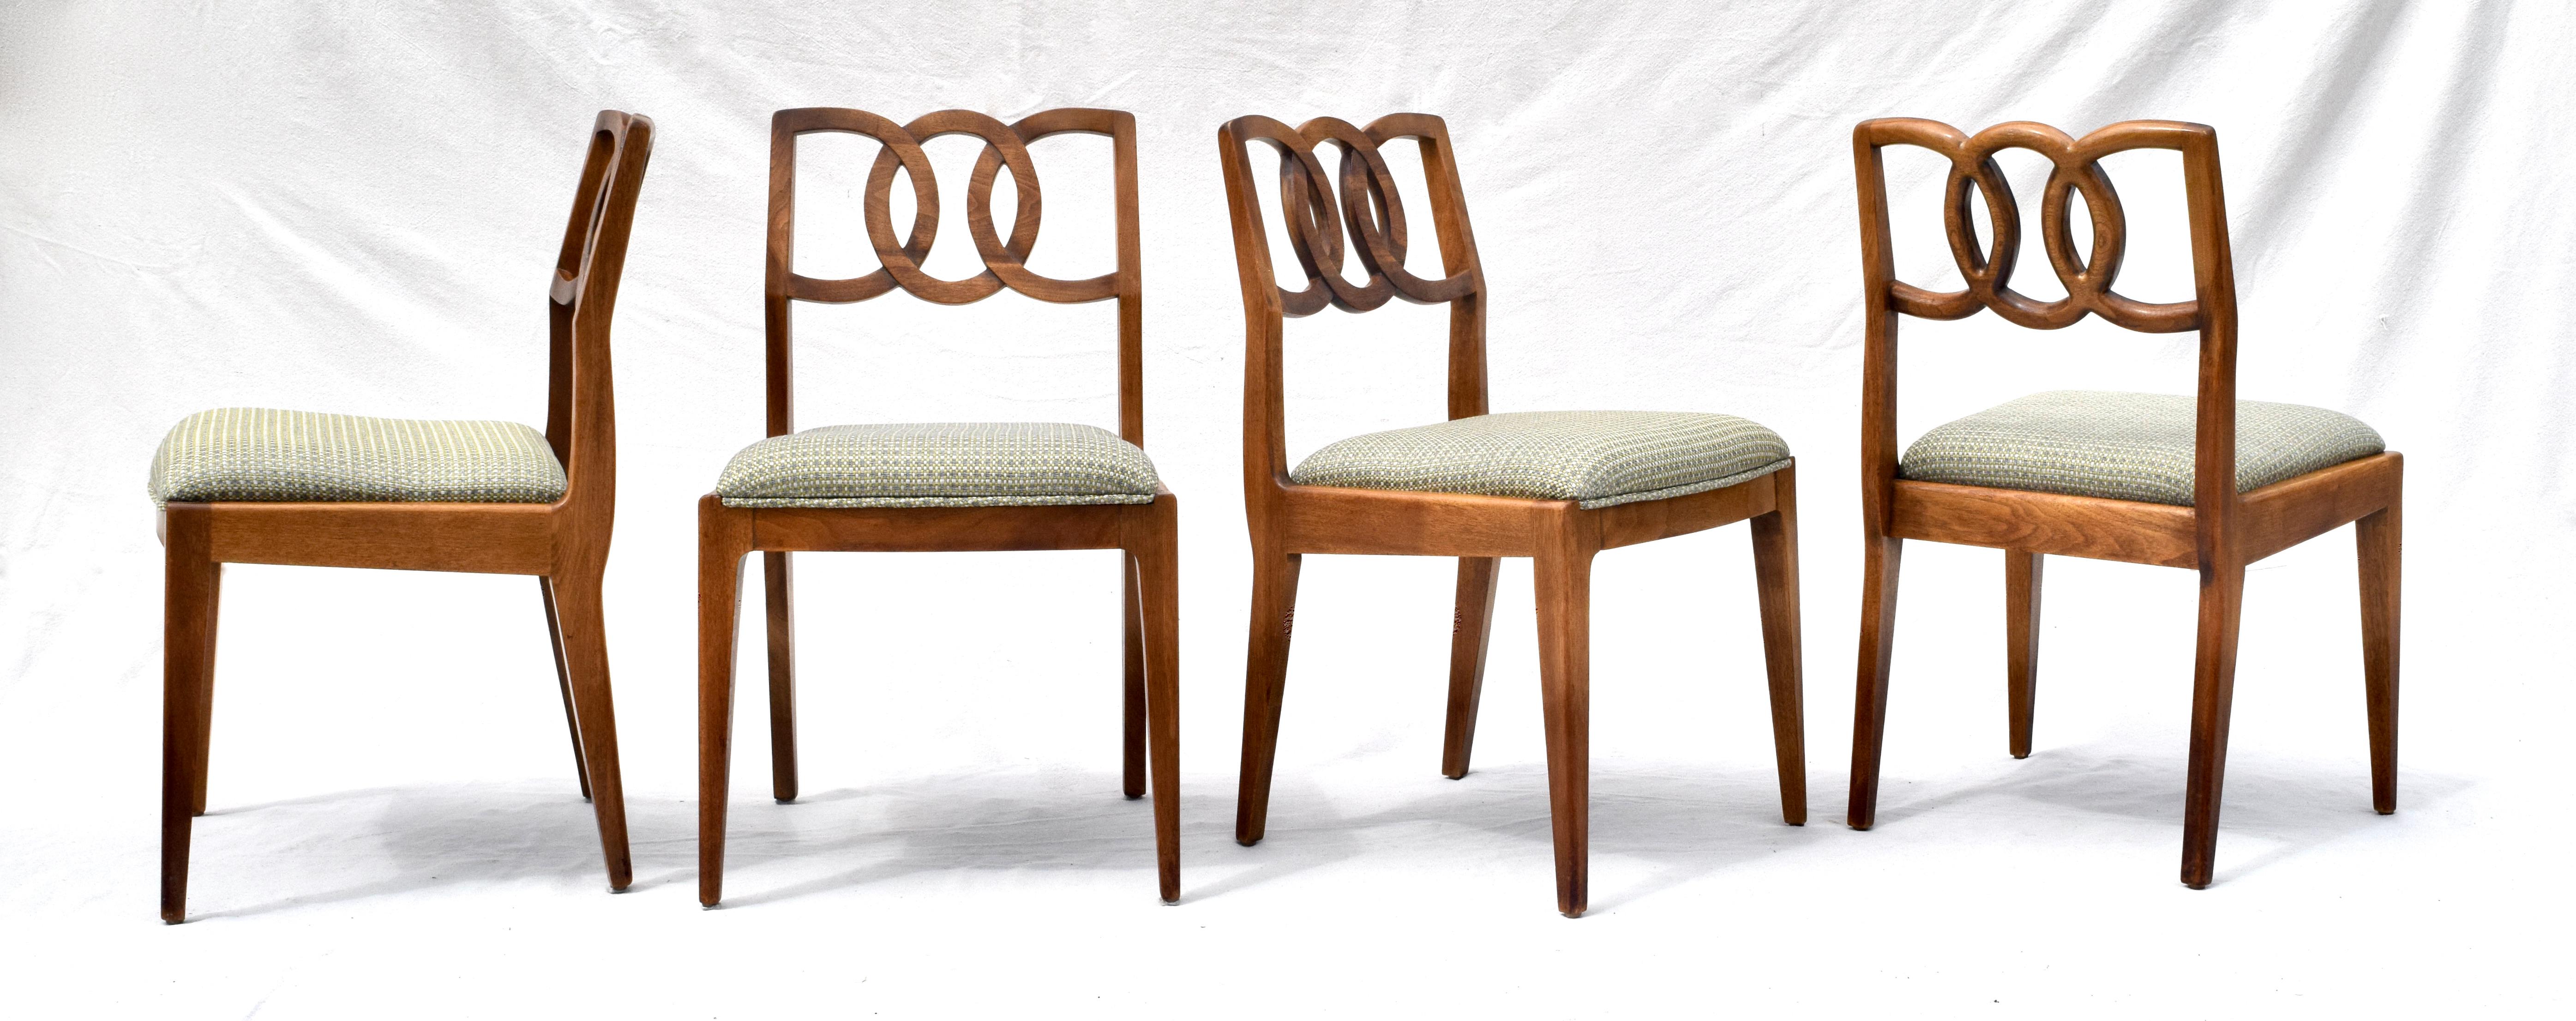 Set of 6 John Stuart walnut interlocking backs dining chairs with new Thom Filicia upholstered seats in excellent vintage condition. Beautifully maintained sculptural forms of solid wood construction with all original hand rubbed